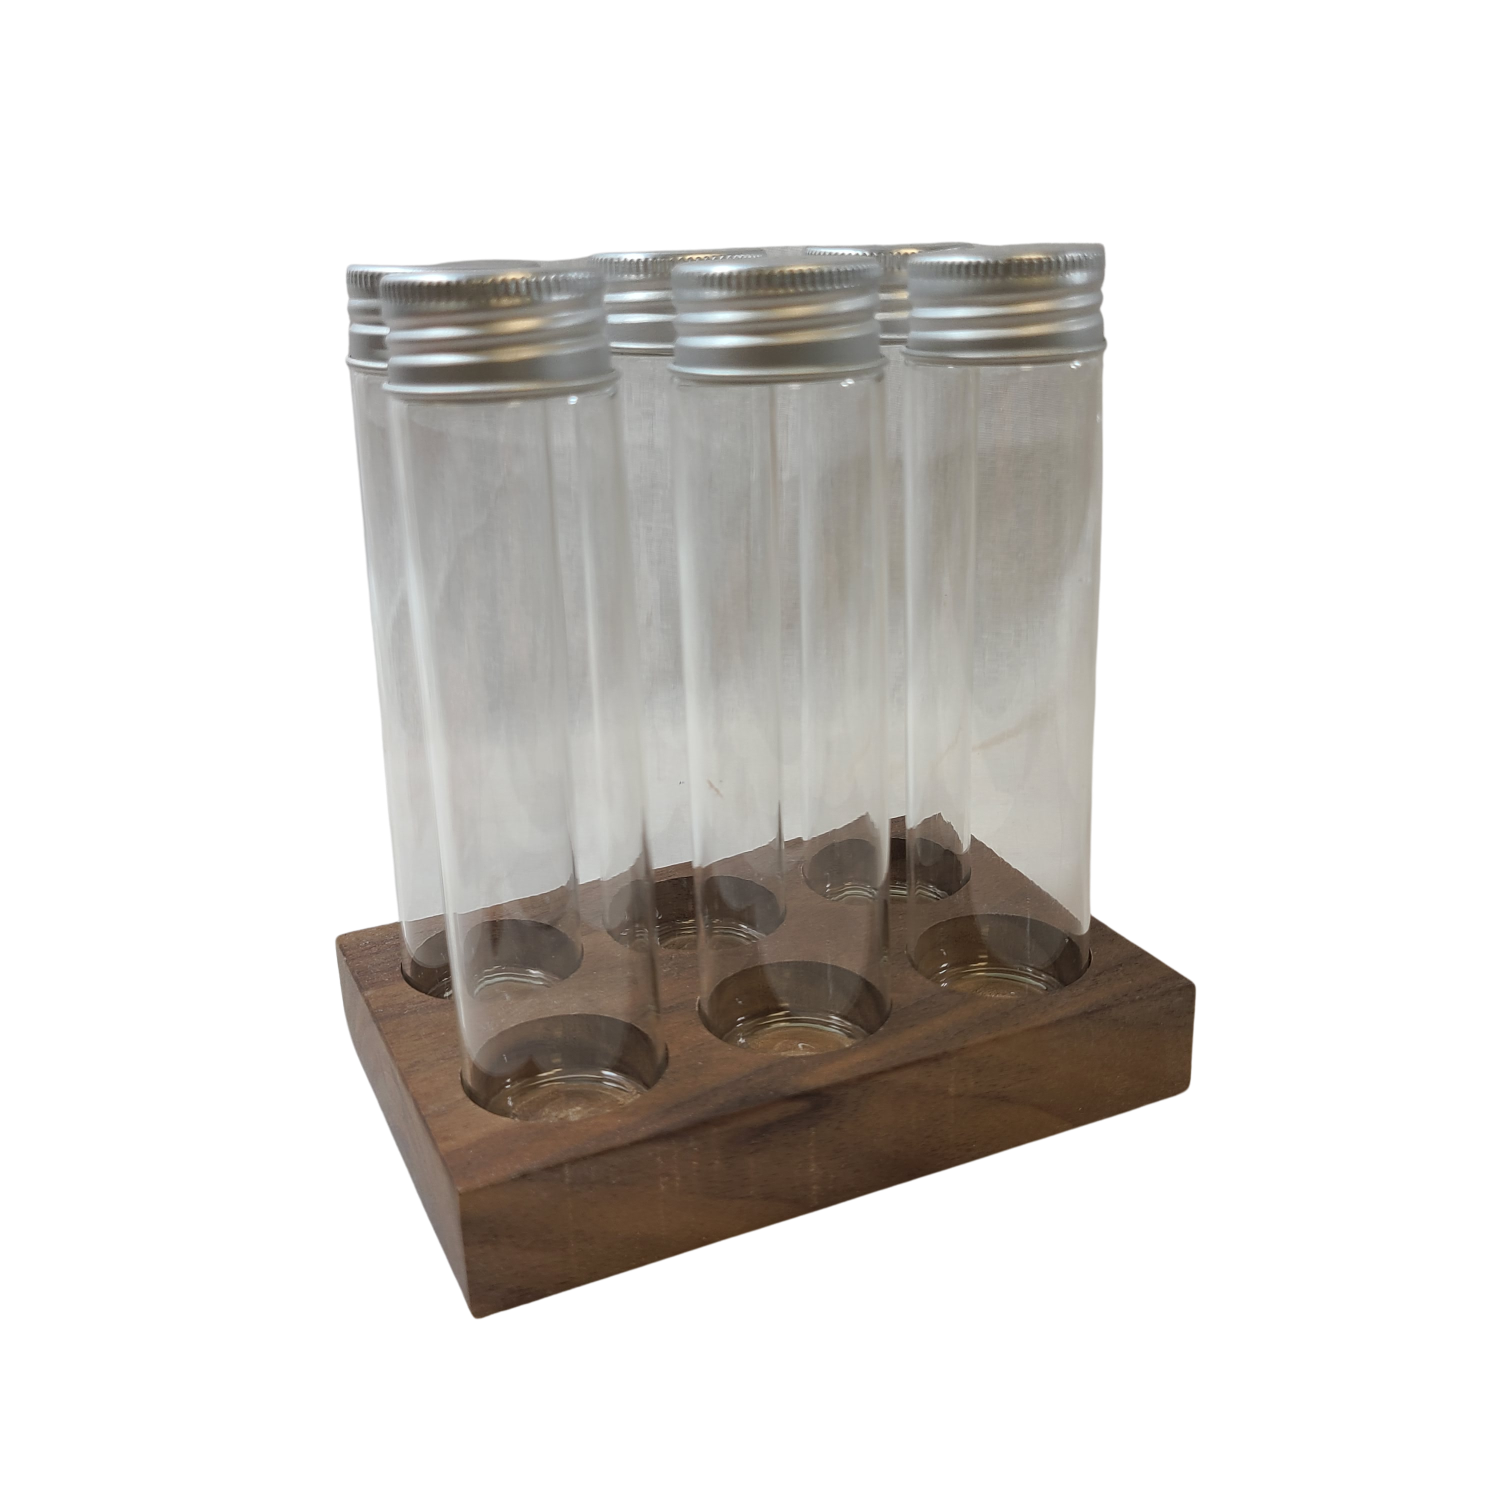 Coffee Sensor Bean Cellar With Walnut Stand And Glass Tubes